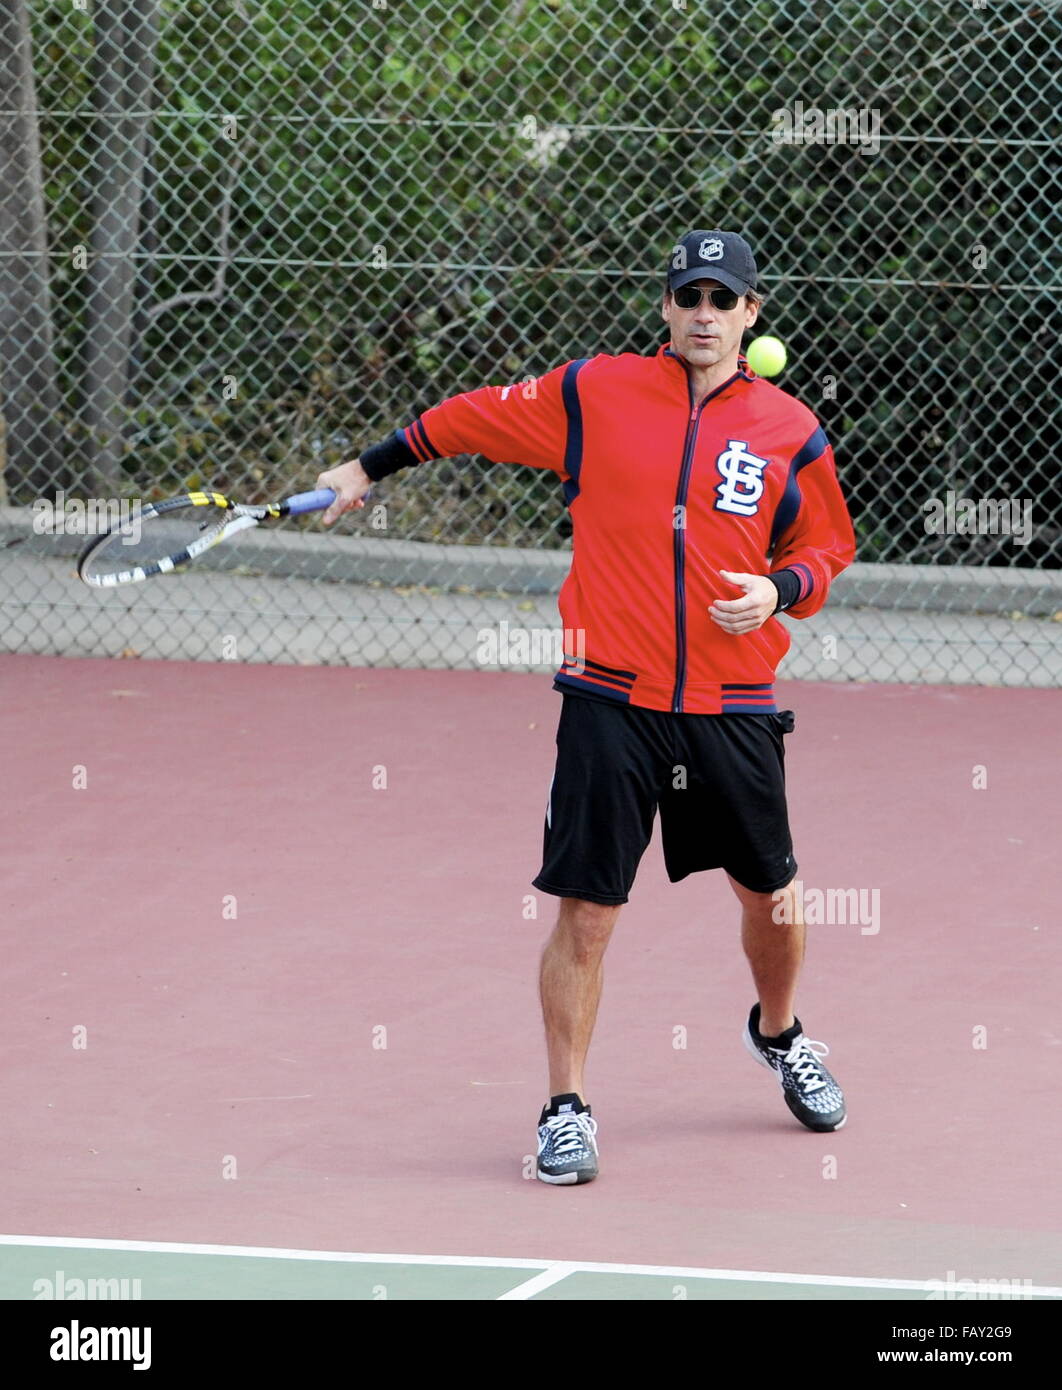 Jon Hamm has a tennis session with his trainer Featuring: Jon Hamm Where:  Los Angeles, California, United States When: 05 Dec 2015 Stock Photo - Alamy